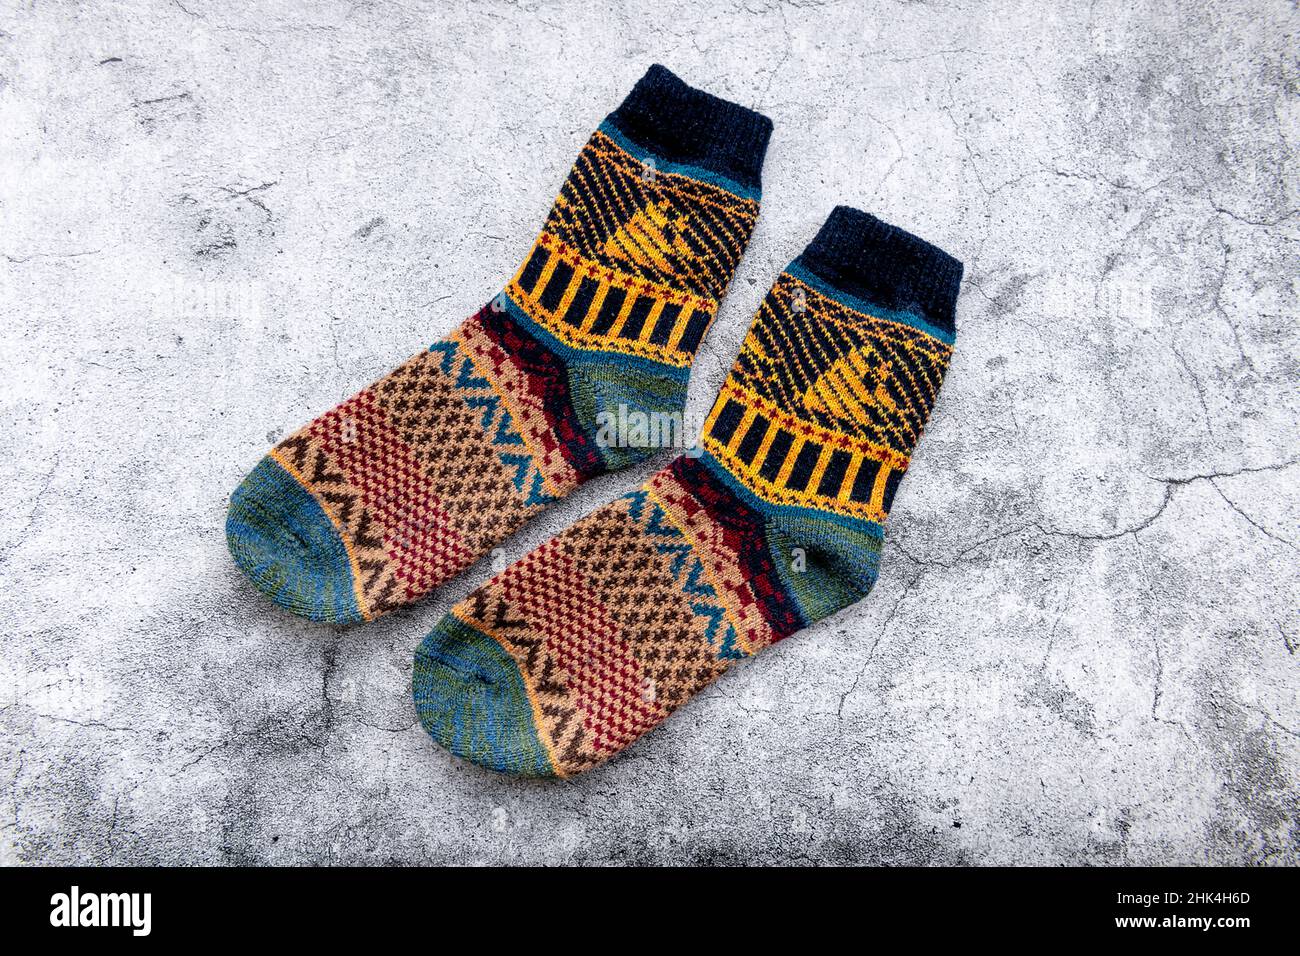 A pair of colorful Winter woolen socks in a grey background. Stock Photo